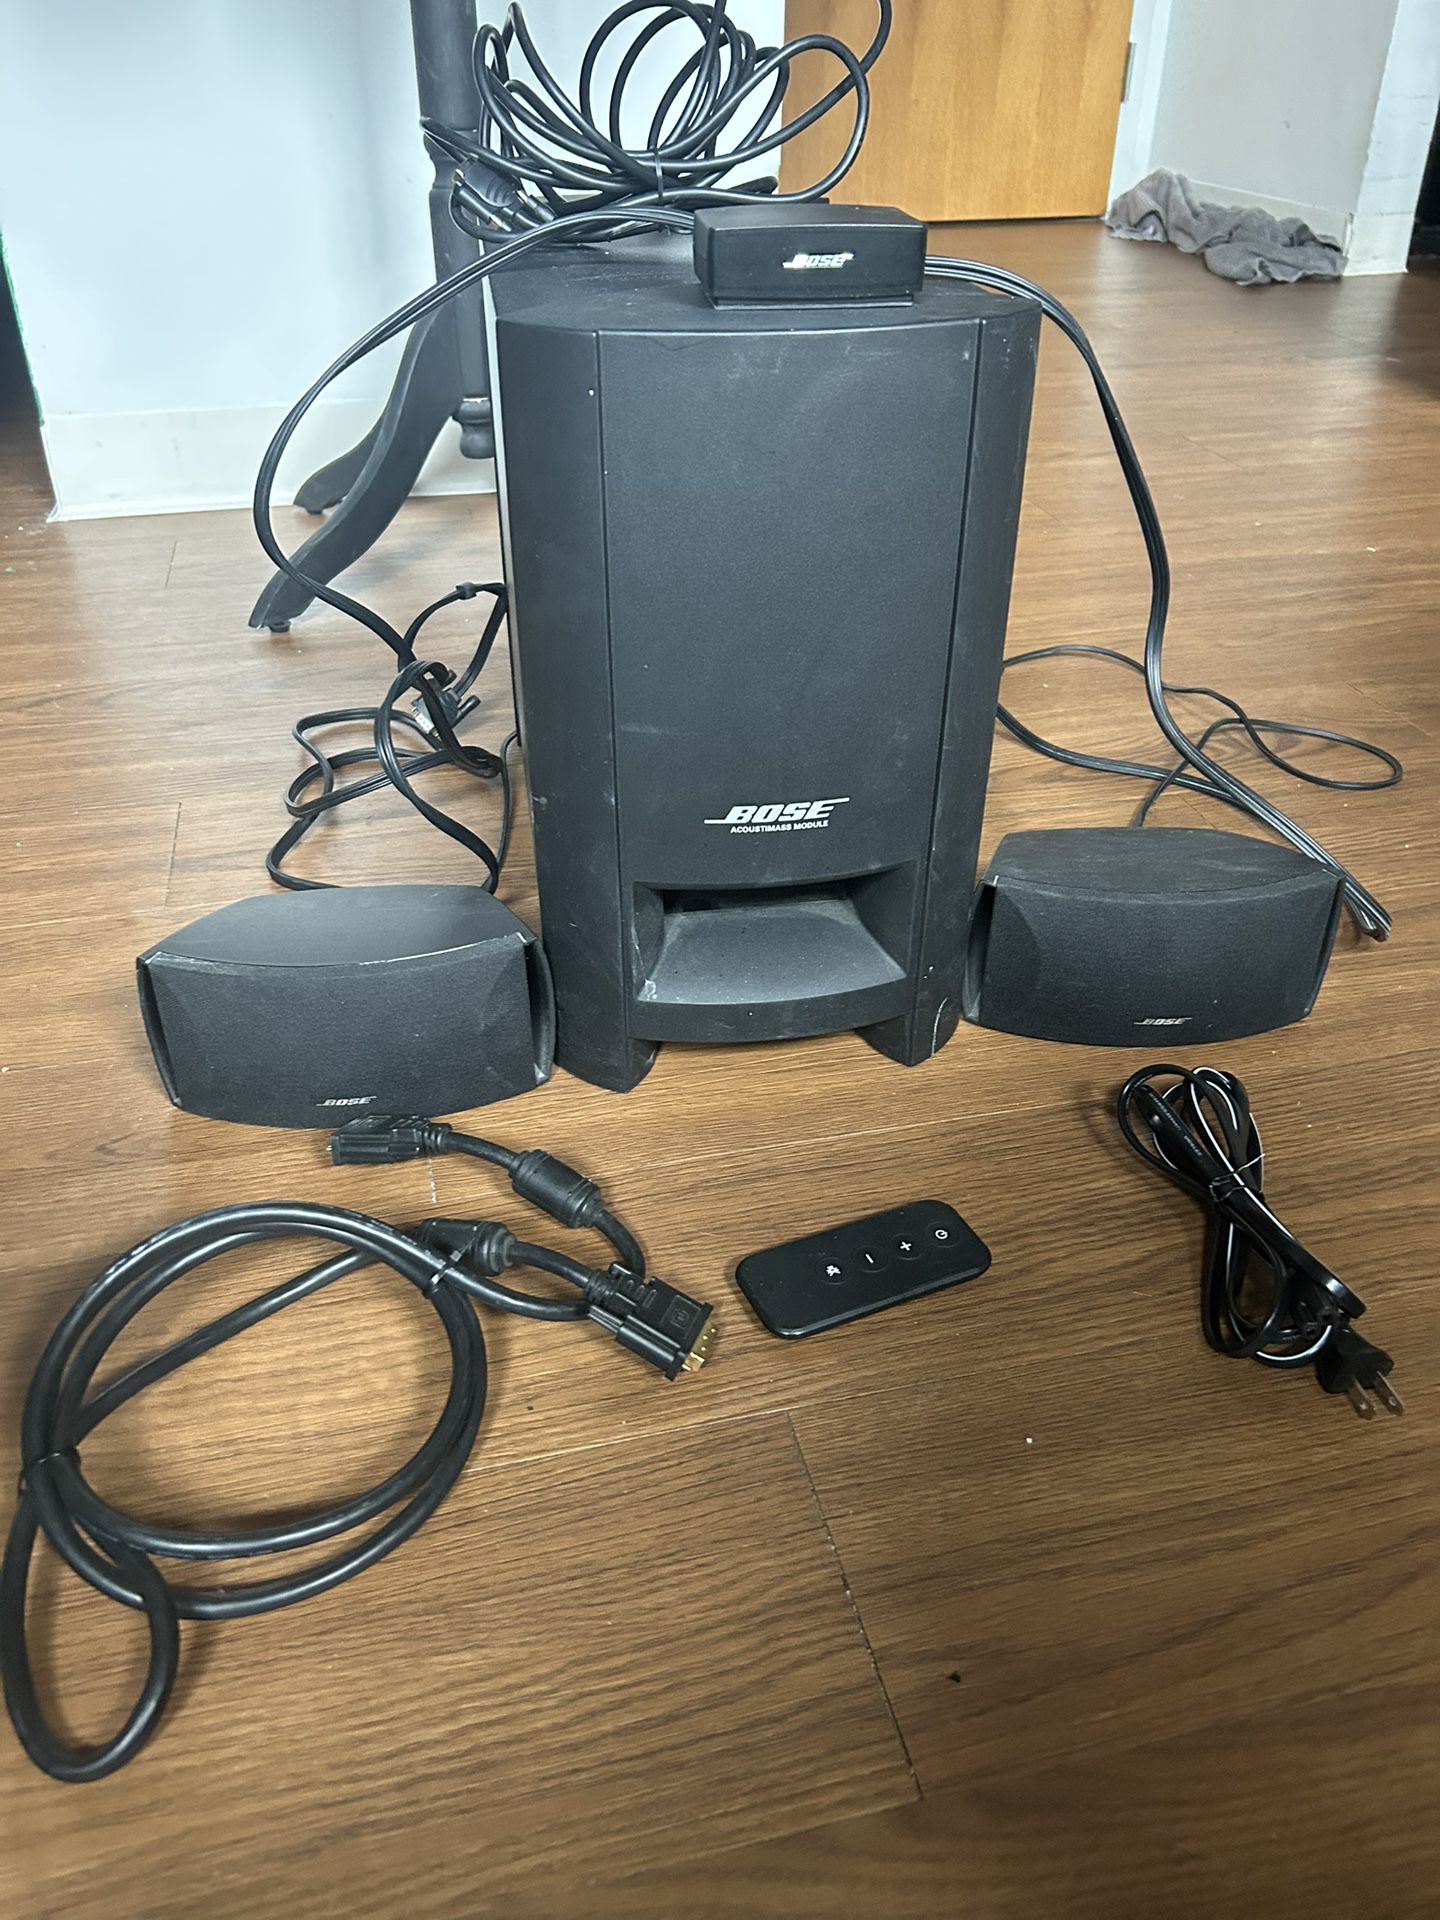 Bose CineMate Series II Digital Home Theater Complete System